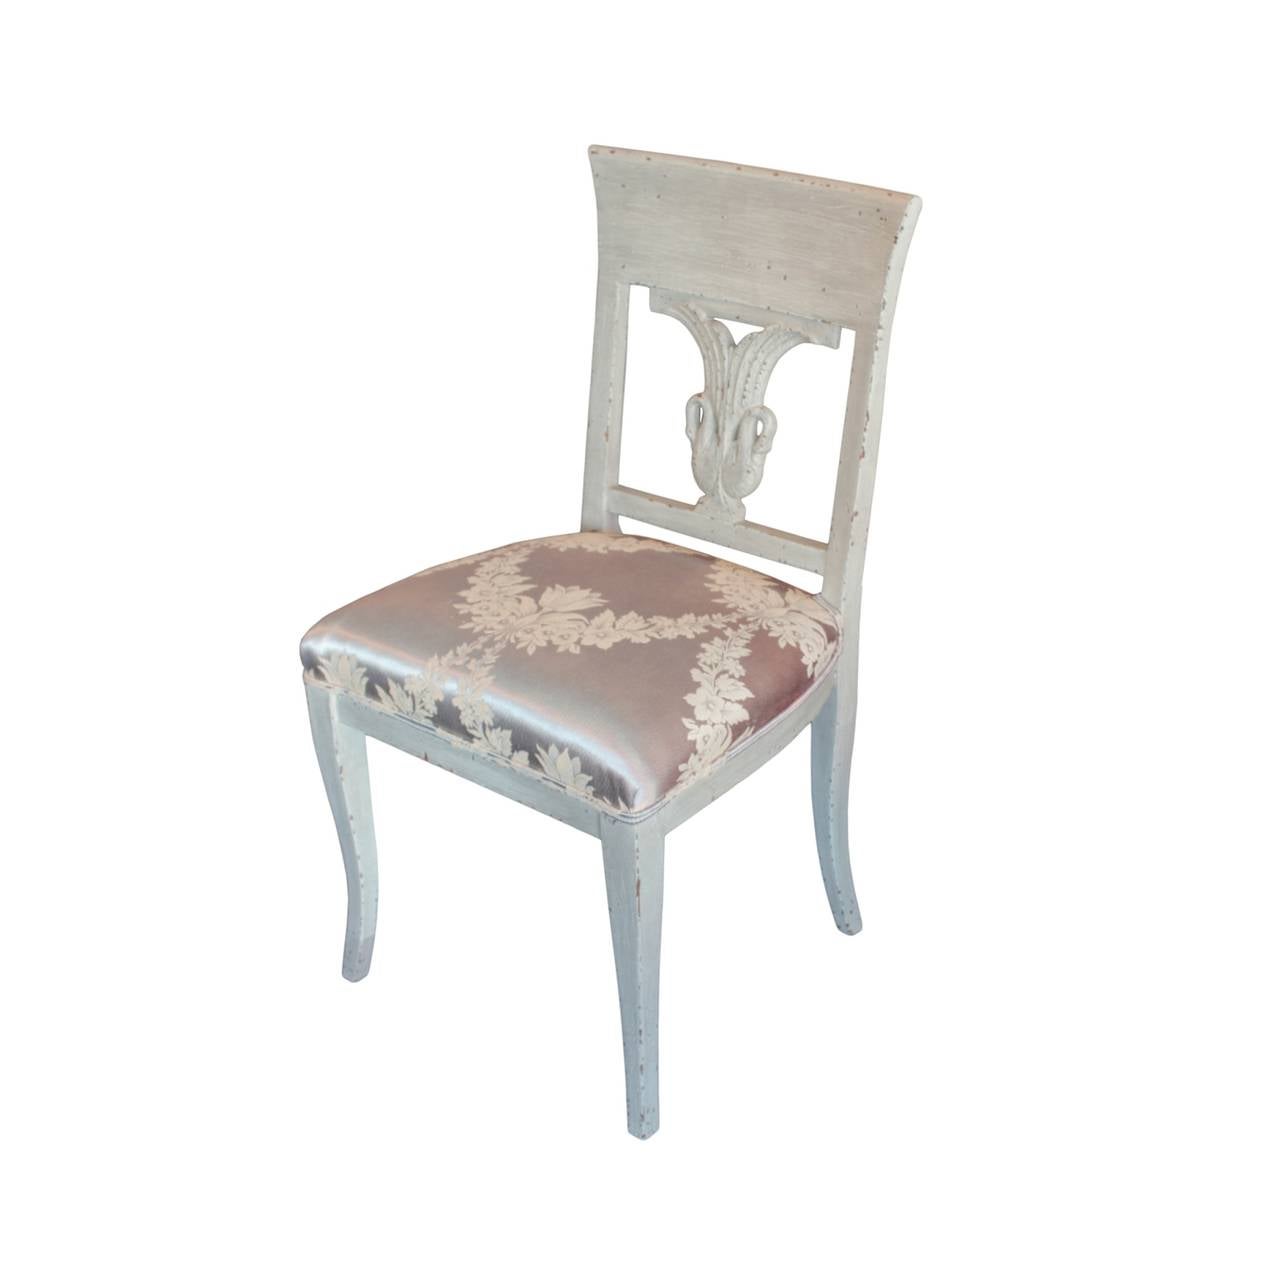 Comfortable and well proportioned, each chair having a back rest decorated with a pair of finely carved adjacent swans with elevated wings forming an urn shaped splat. Sabre legs creating four corresponding subtle klismos configurations. In painted